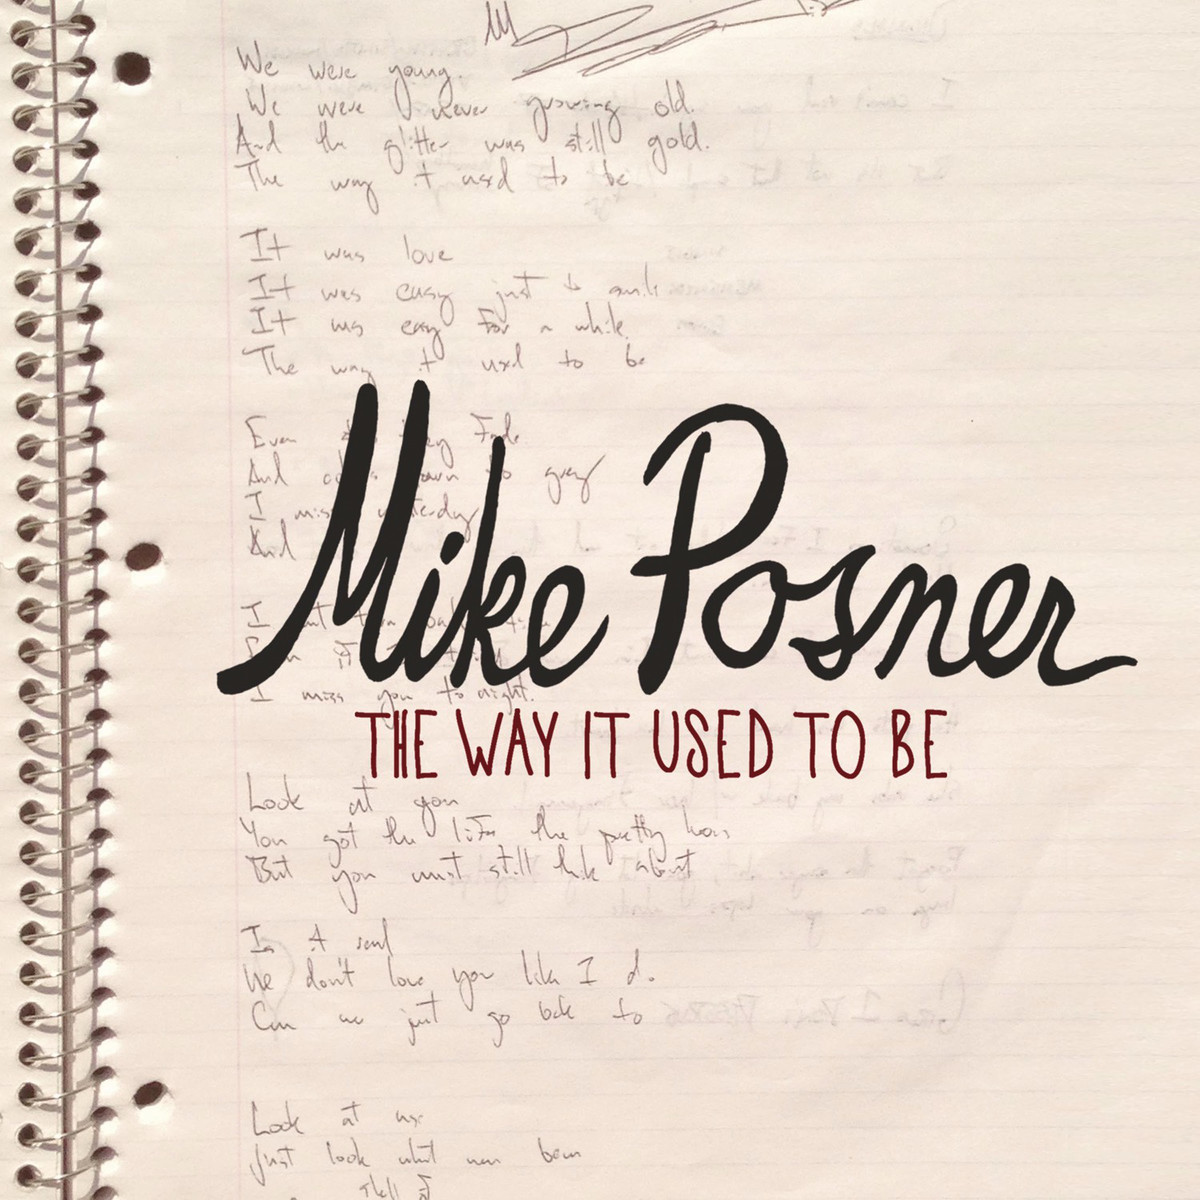 Mike Posner – The Way It Used To Be